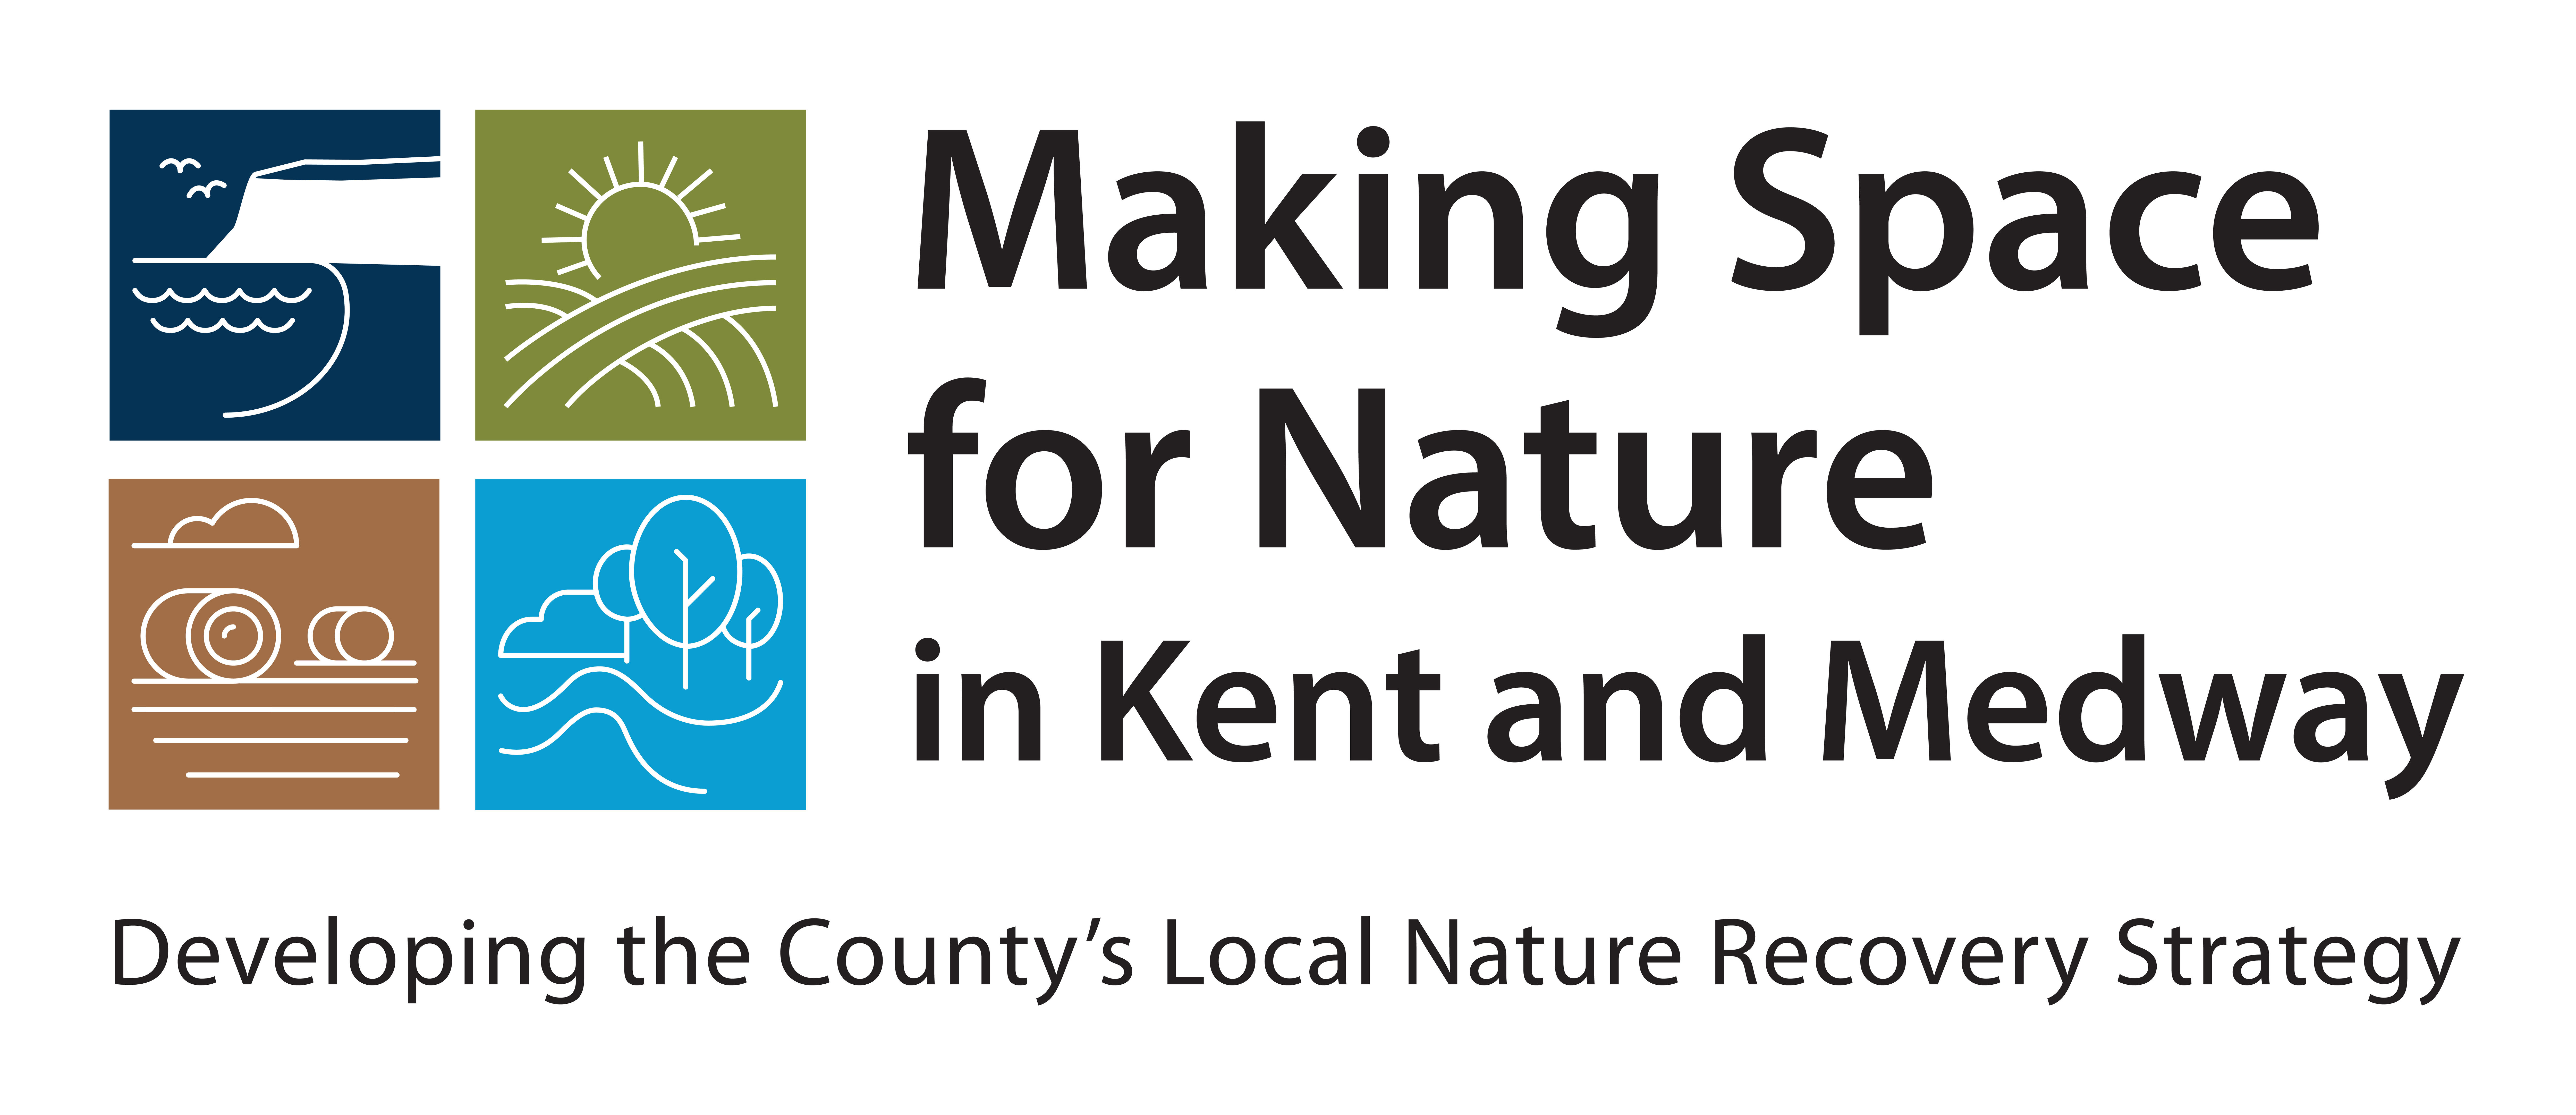 Making space for nature logo